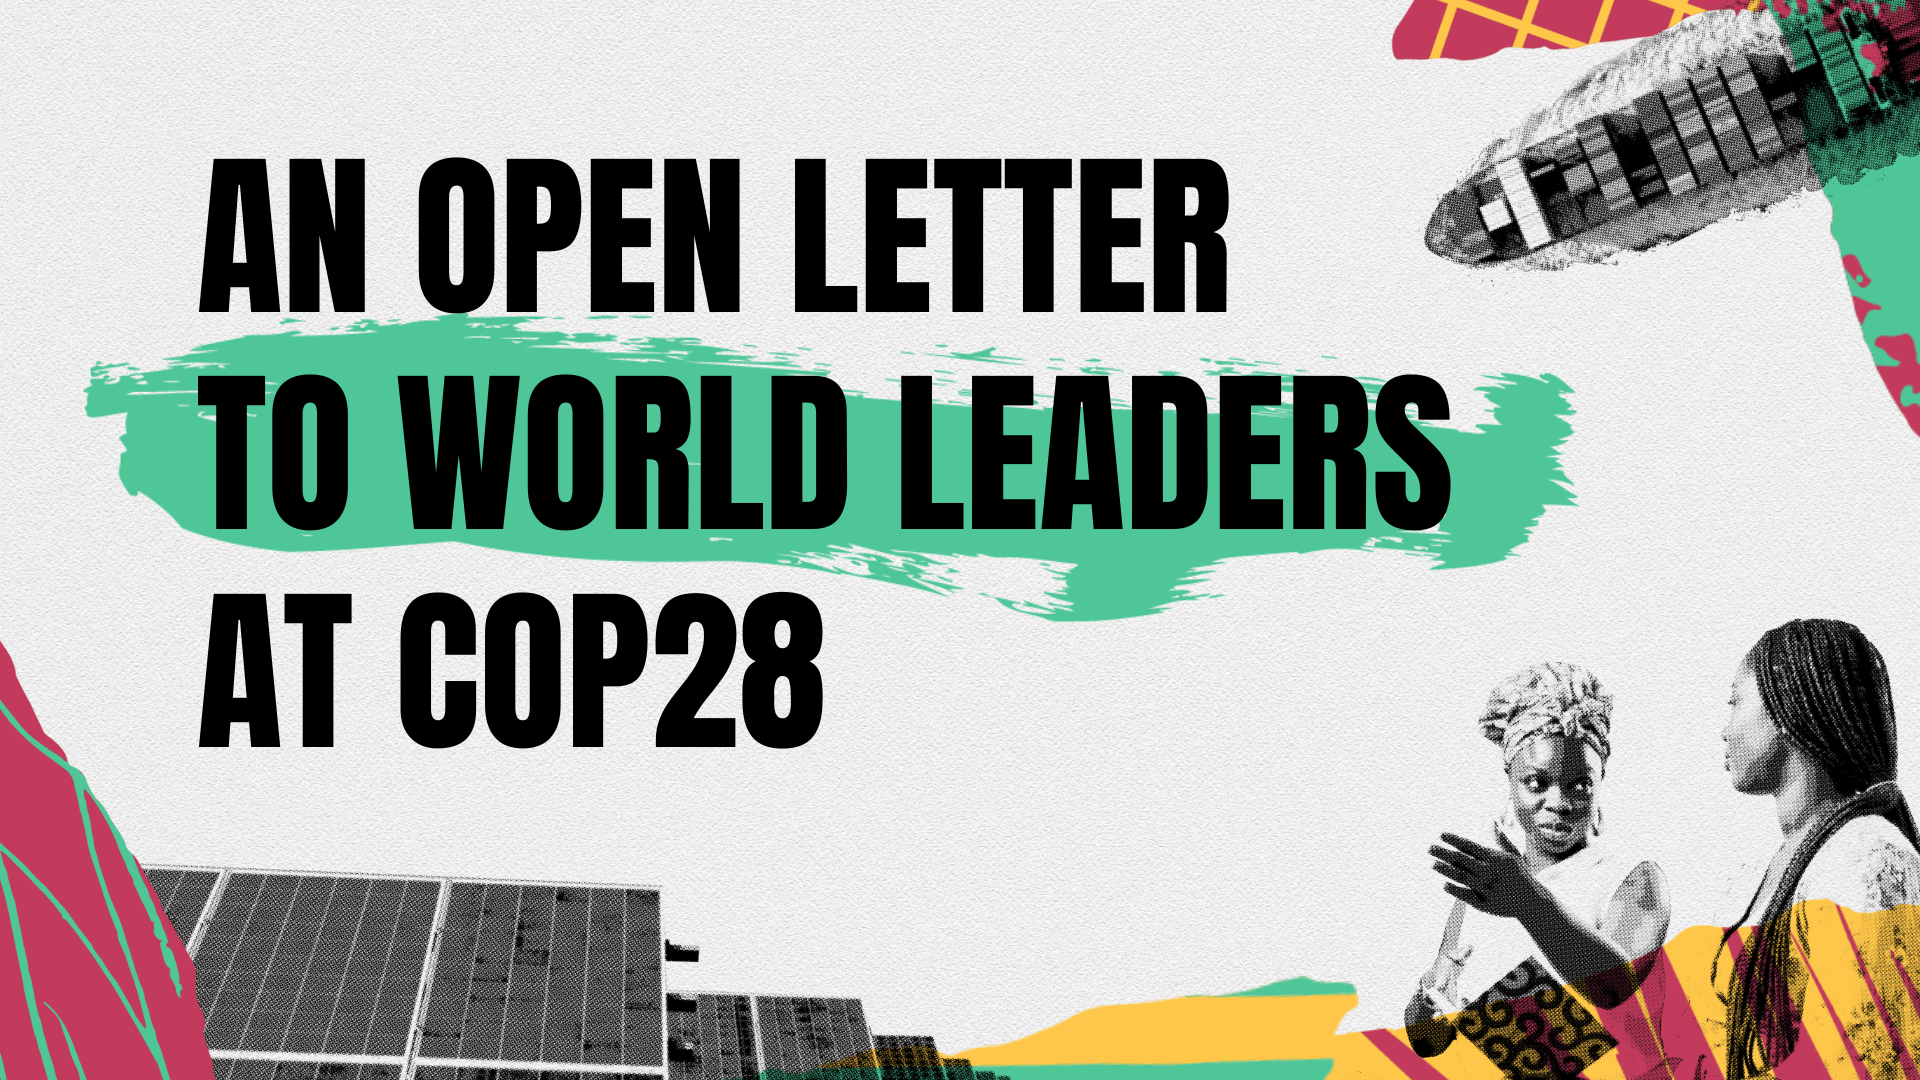 Leaders call for bold climate action at COP28